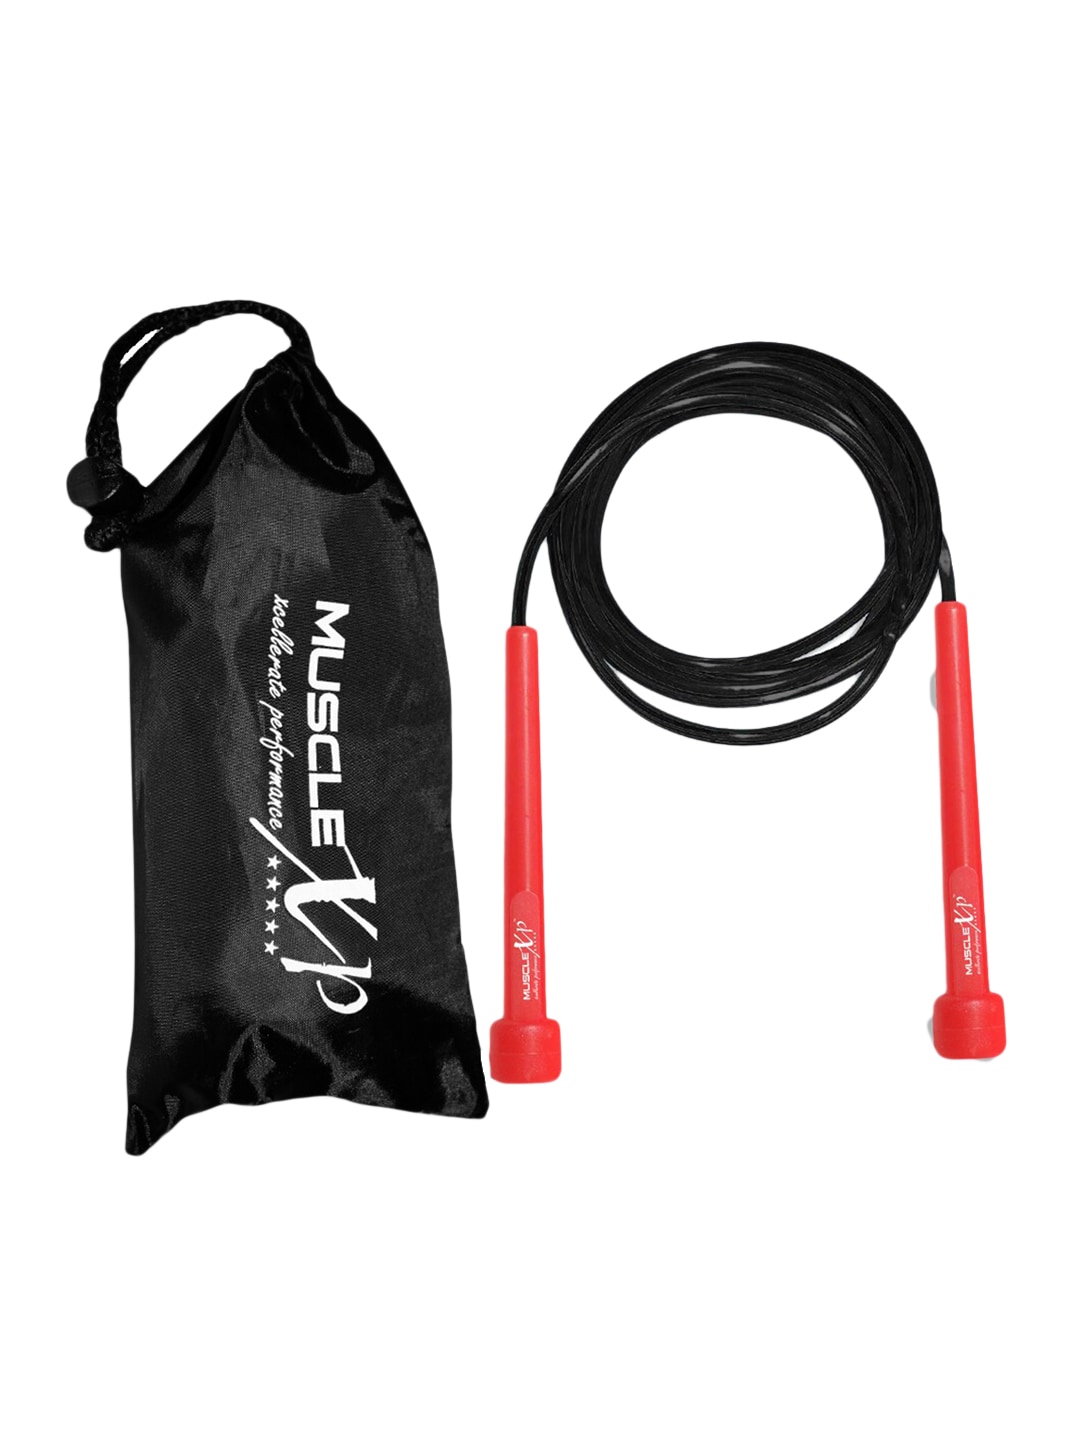 MUSCLEX Black Skipping Rope Price in India